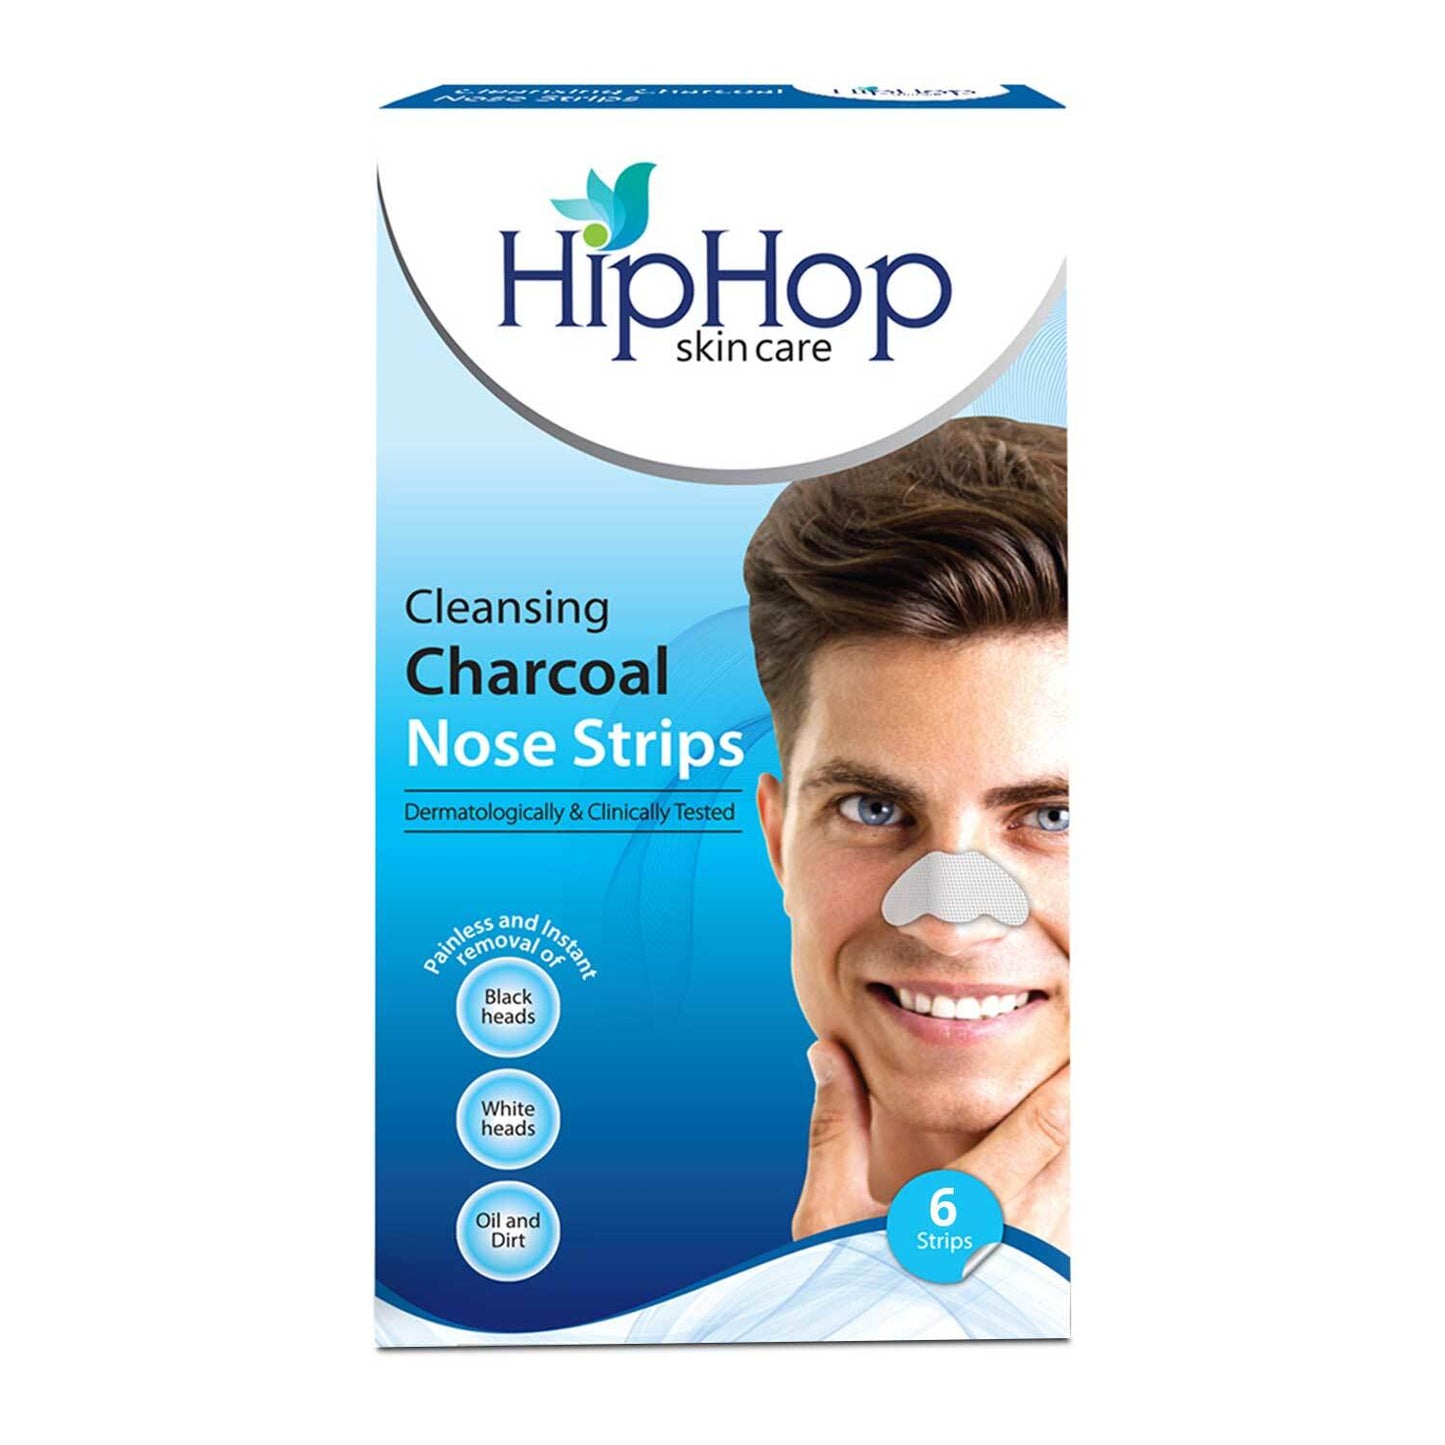 HipHop Blackhead Remover Nose Strips for Men (Activated Charcoal, 6 Strips) + Facial Wax Strips (Argan Oil, 20 Strips)